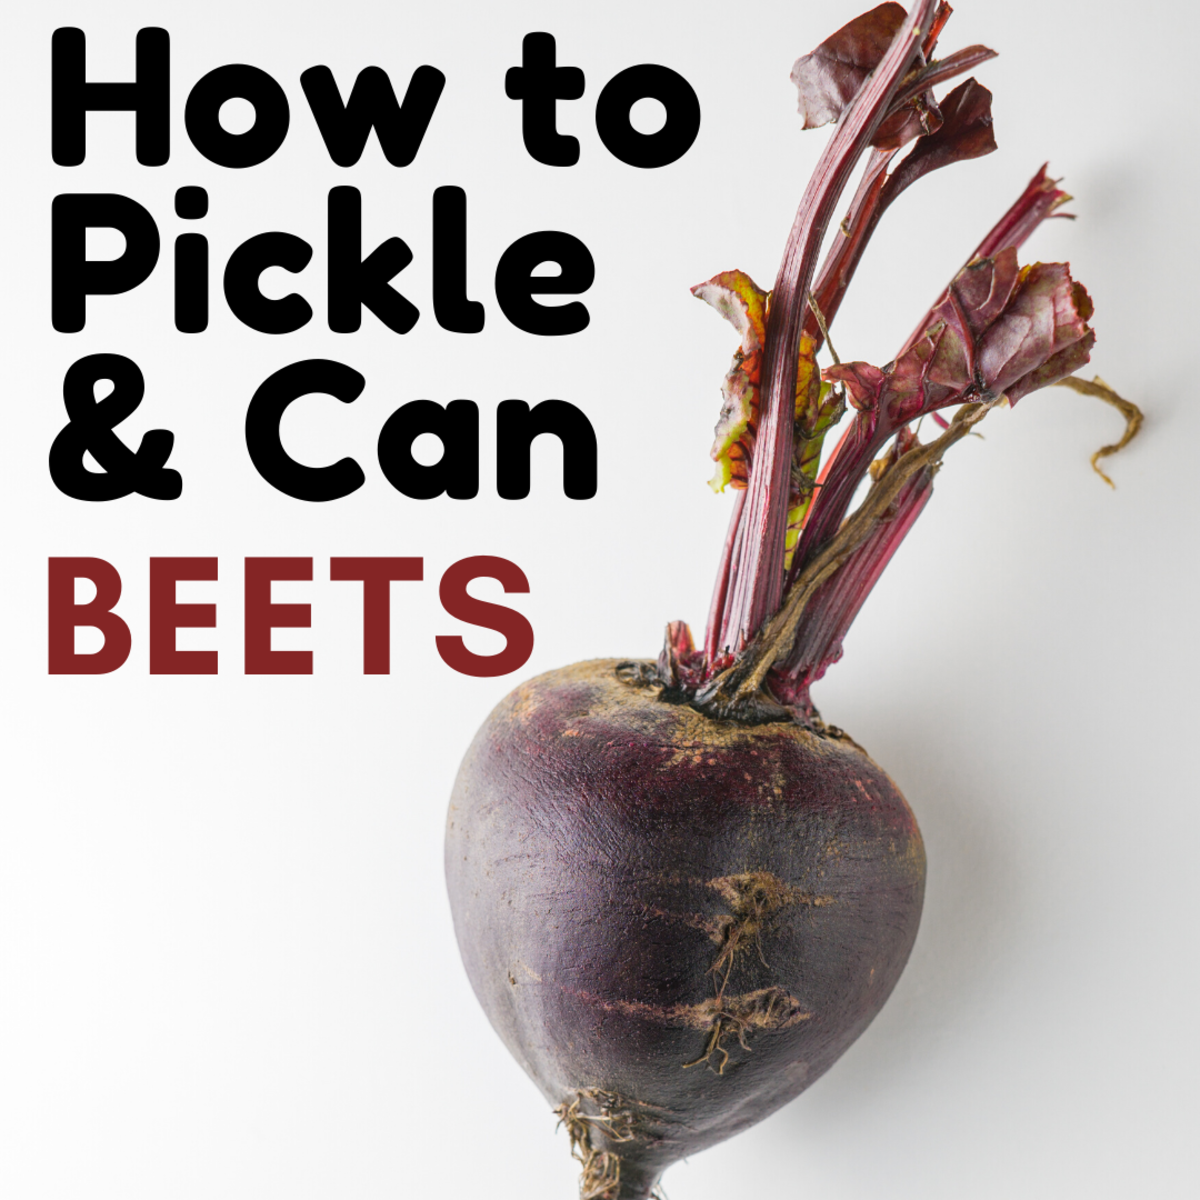 How to pickle and can beets